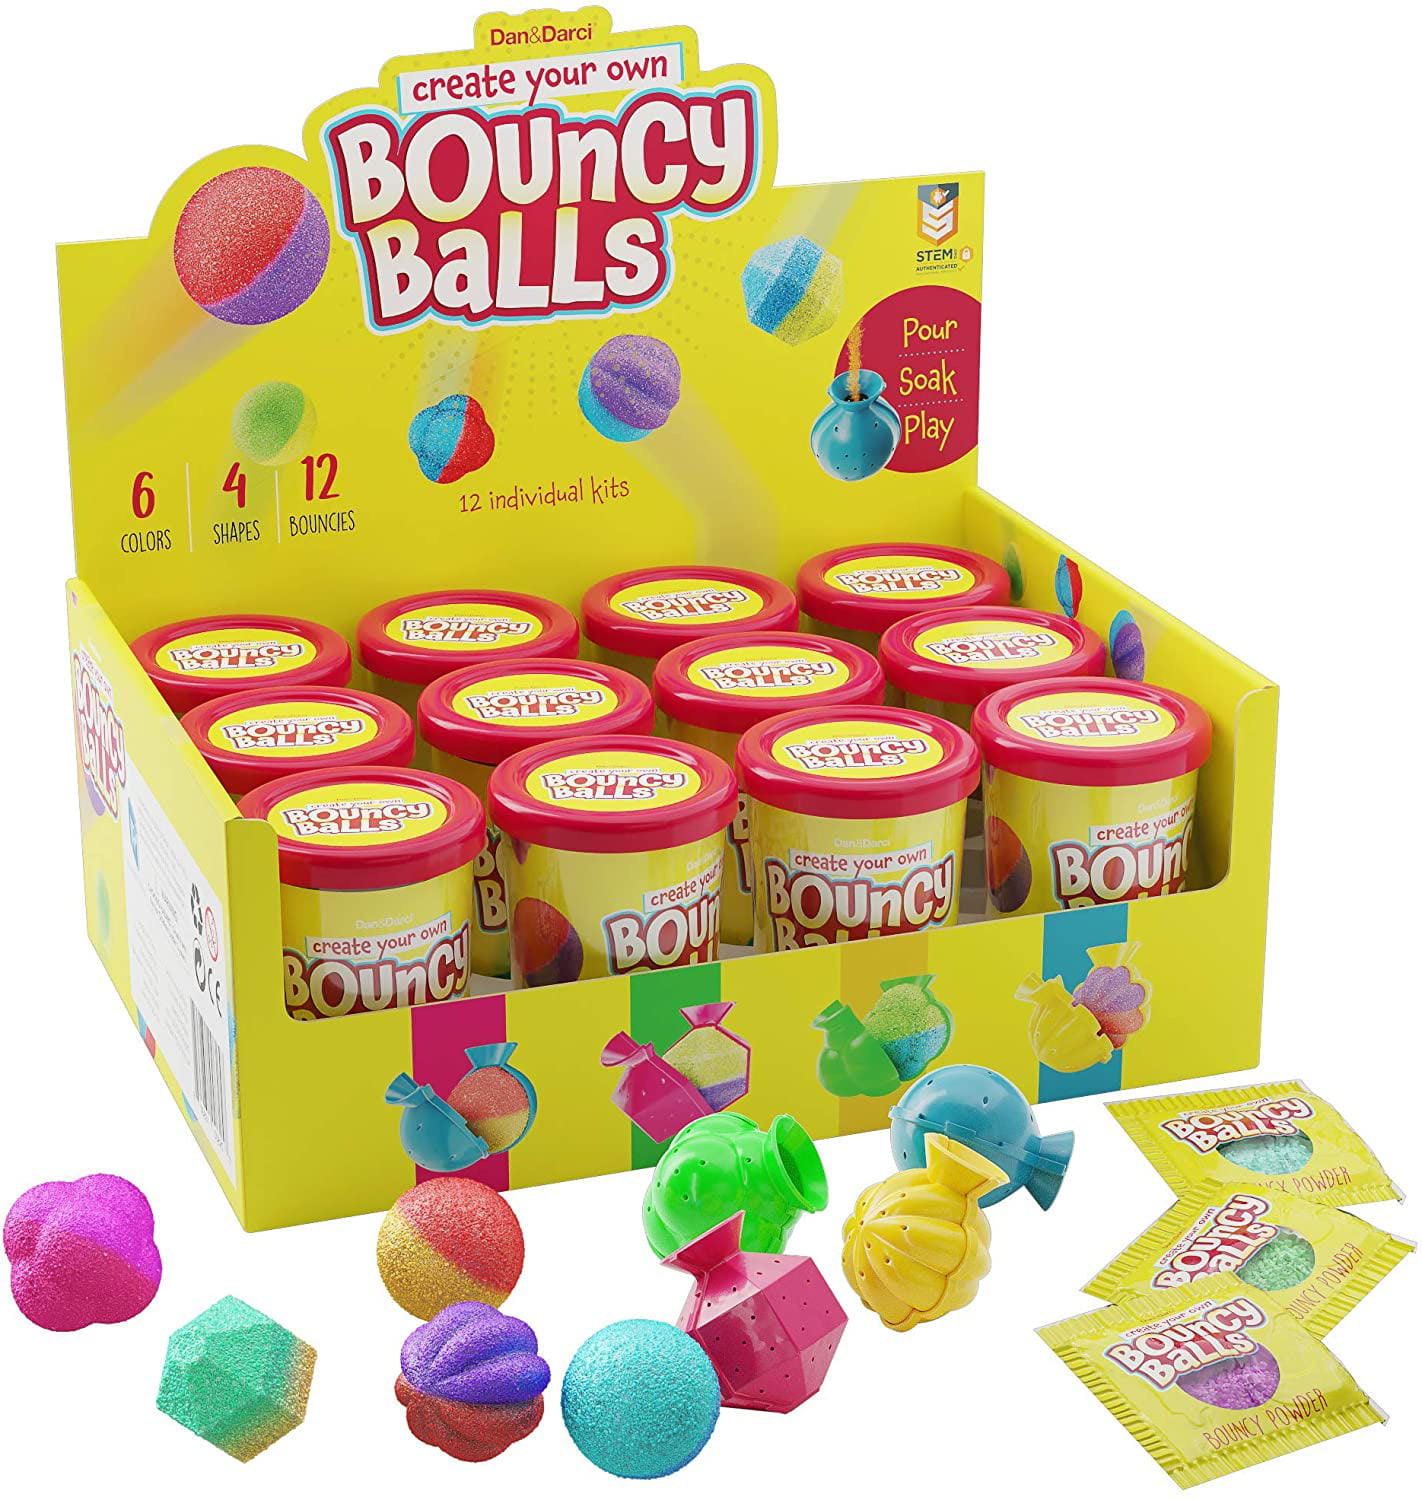 Icy Bouncy Balls - 1 1/2 Inch (38mm) - 12 Count: Rebecca's Toys & Prizes